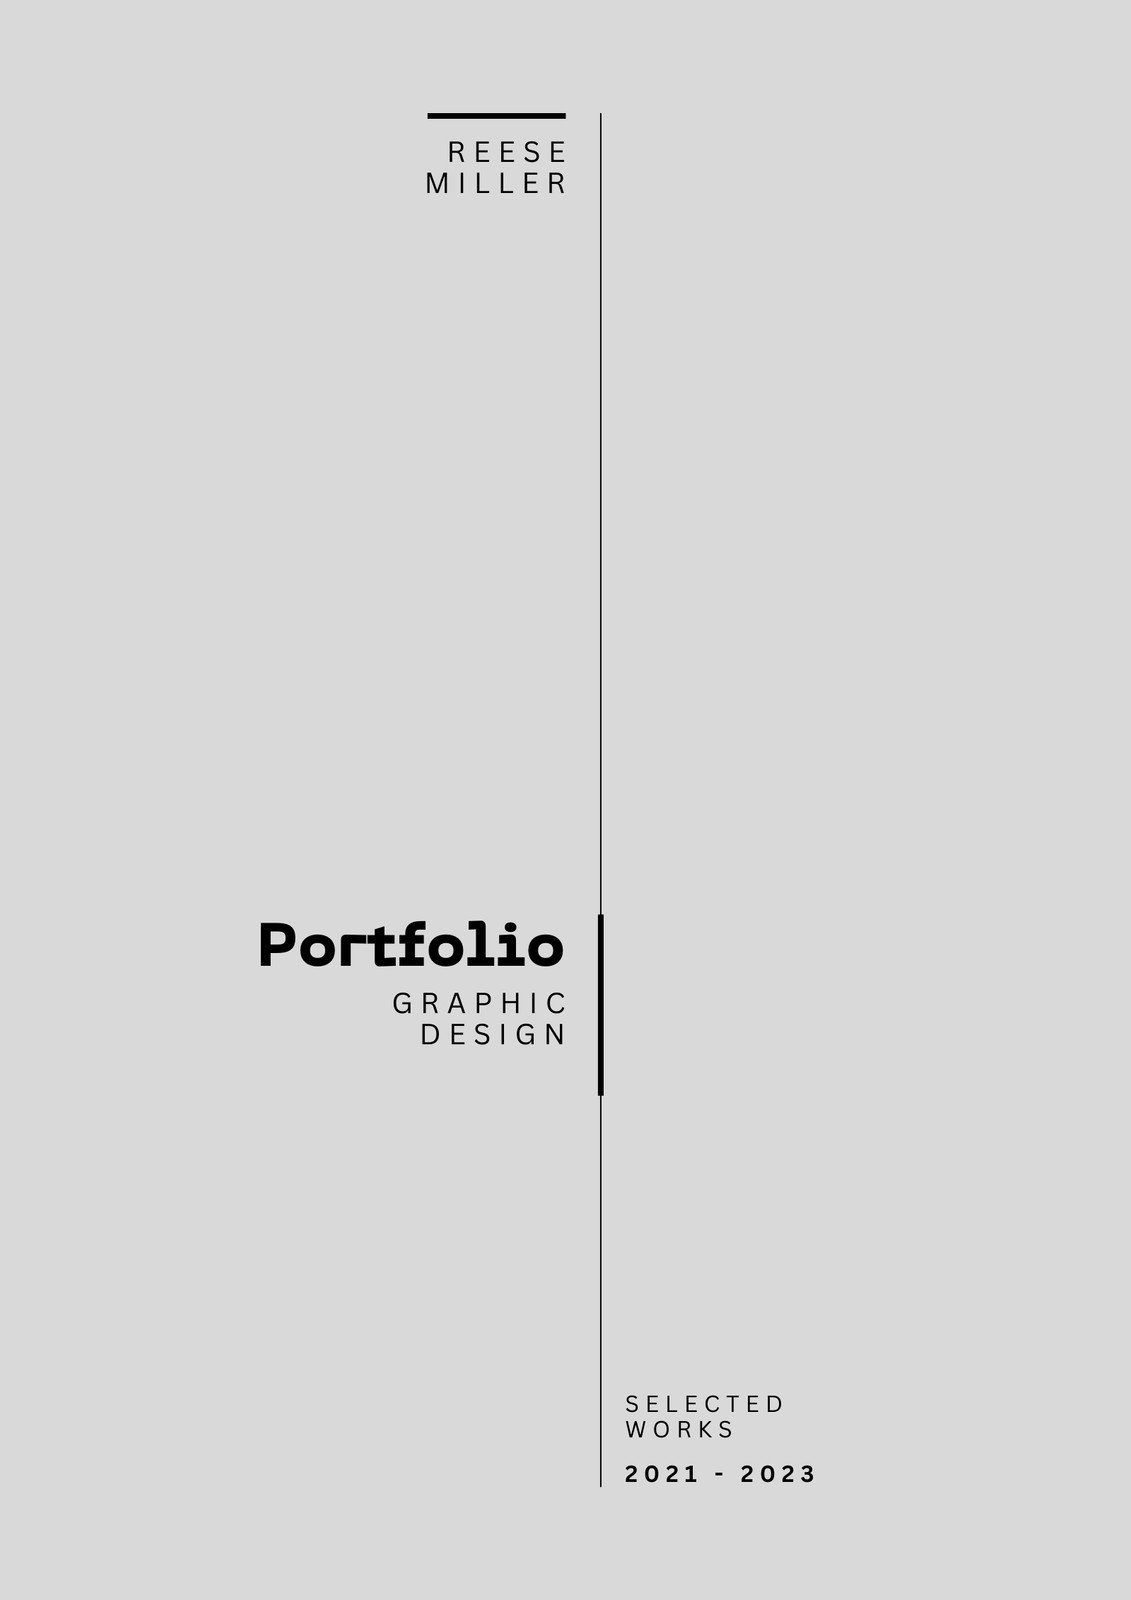 Canva Gray And Black Simple Portfolio Cover Document EtjyRVmtLtI 